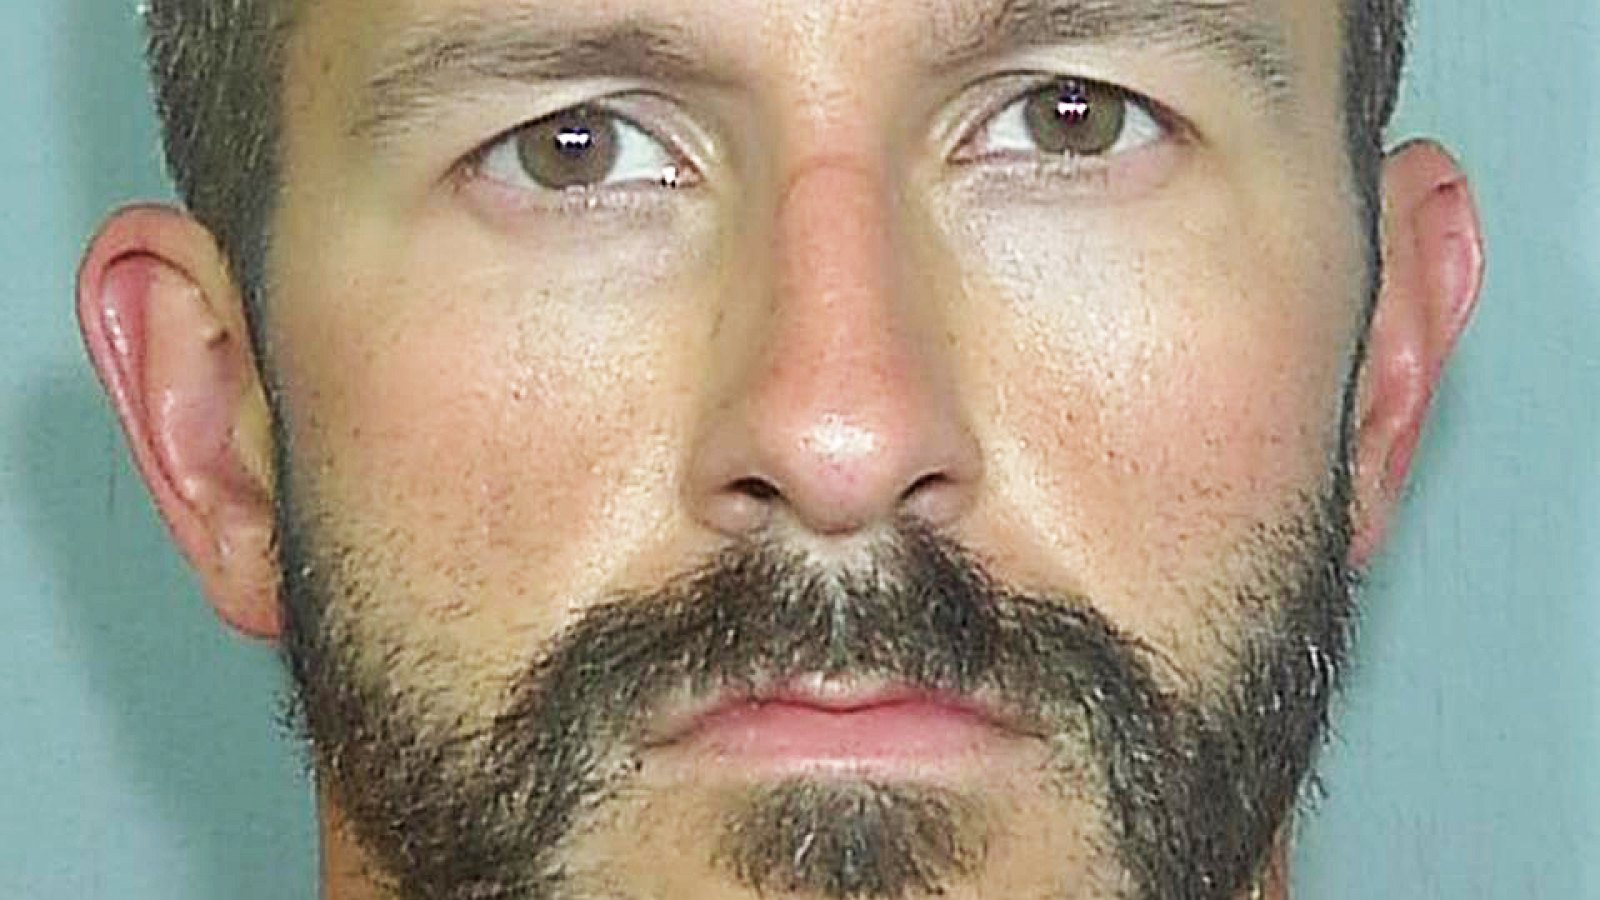 Colorado Man Charged With Murdering Pregnant Wife and Daughters Filed for Bankruptcy in 2015